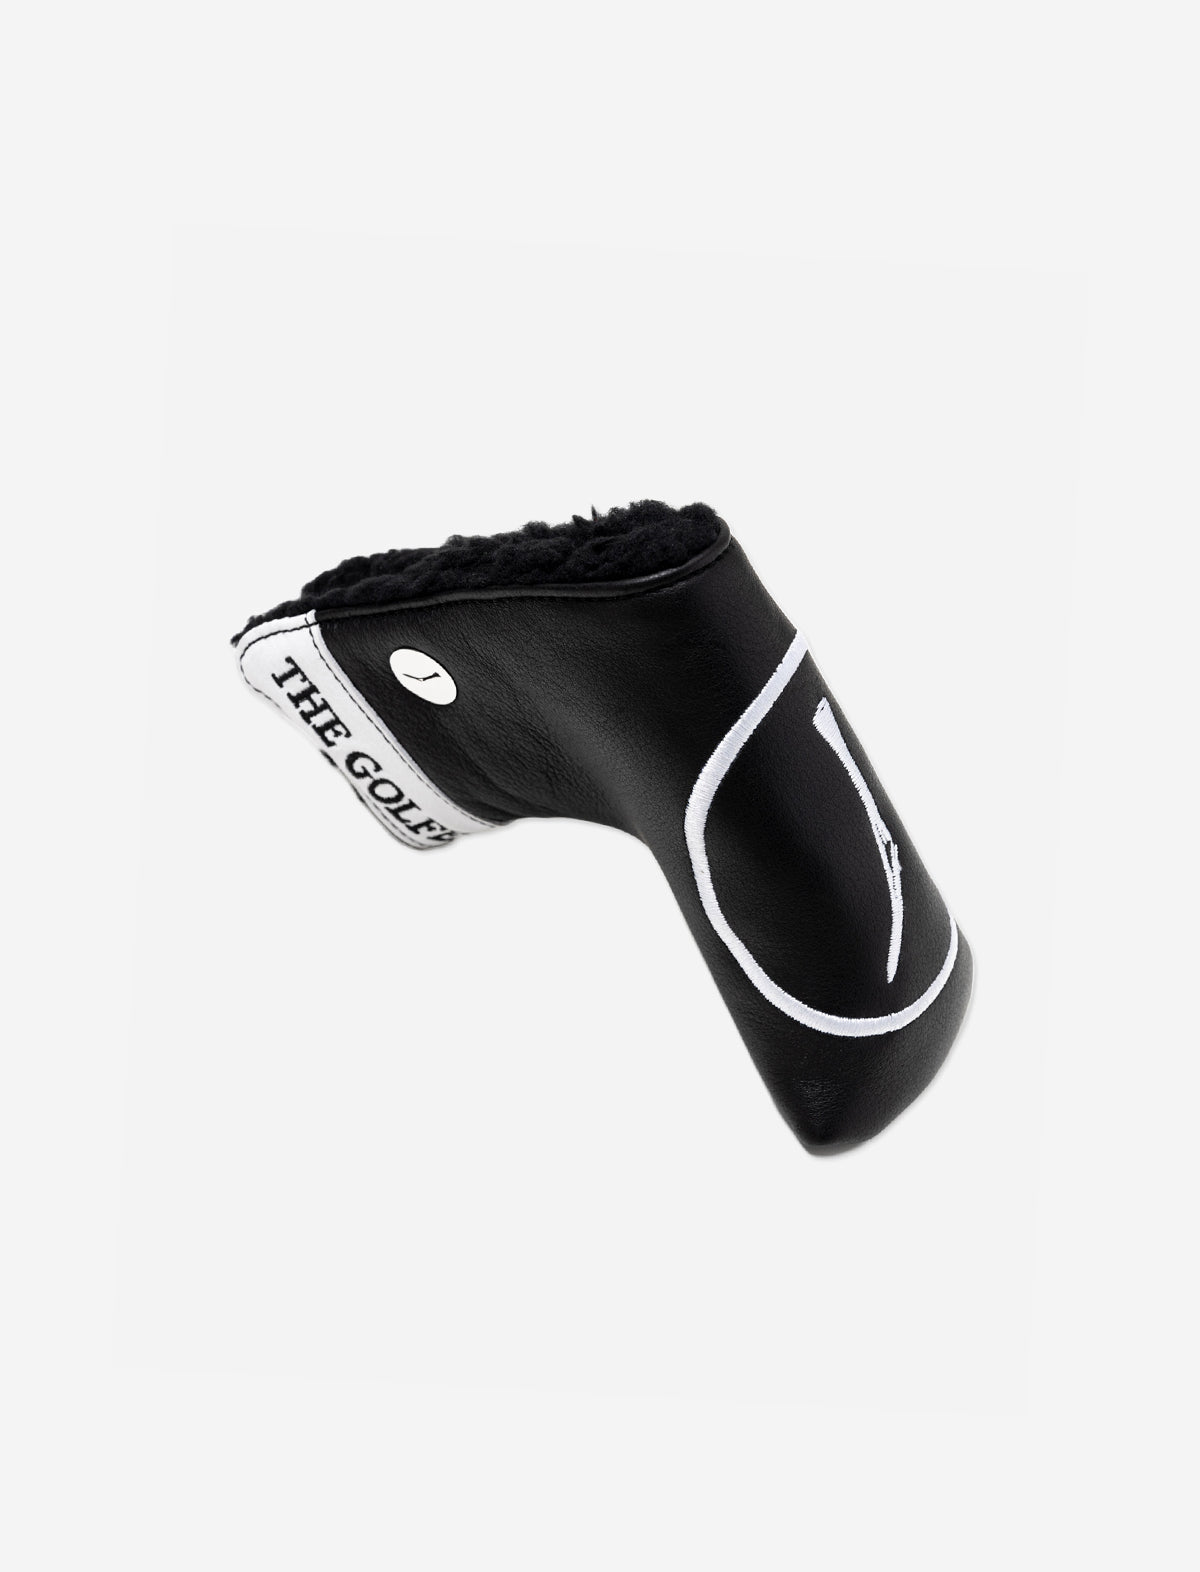 THE GOLFERS JOURNAL The Blade Putter Cover in White